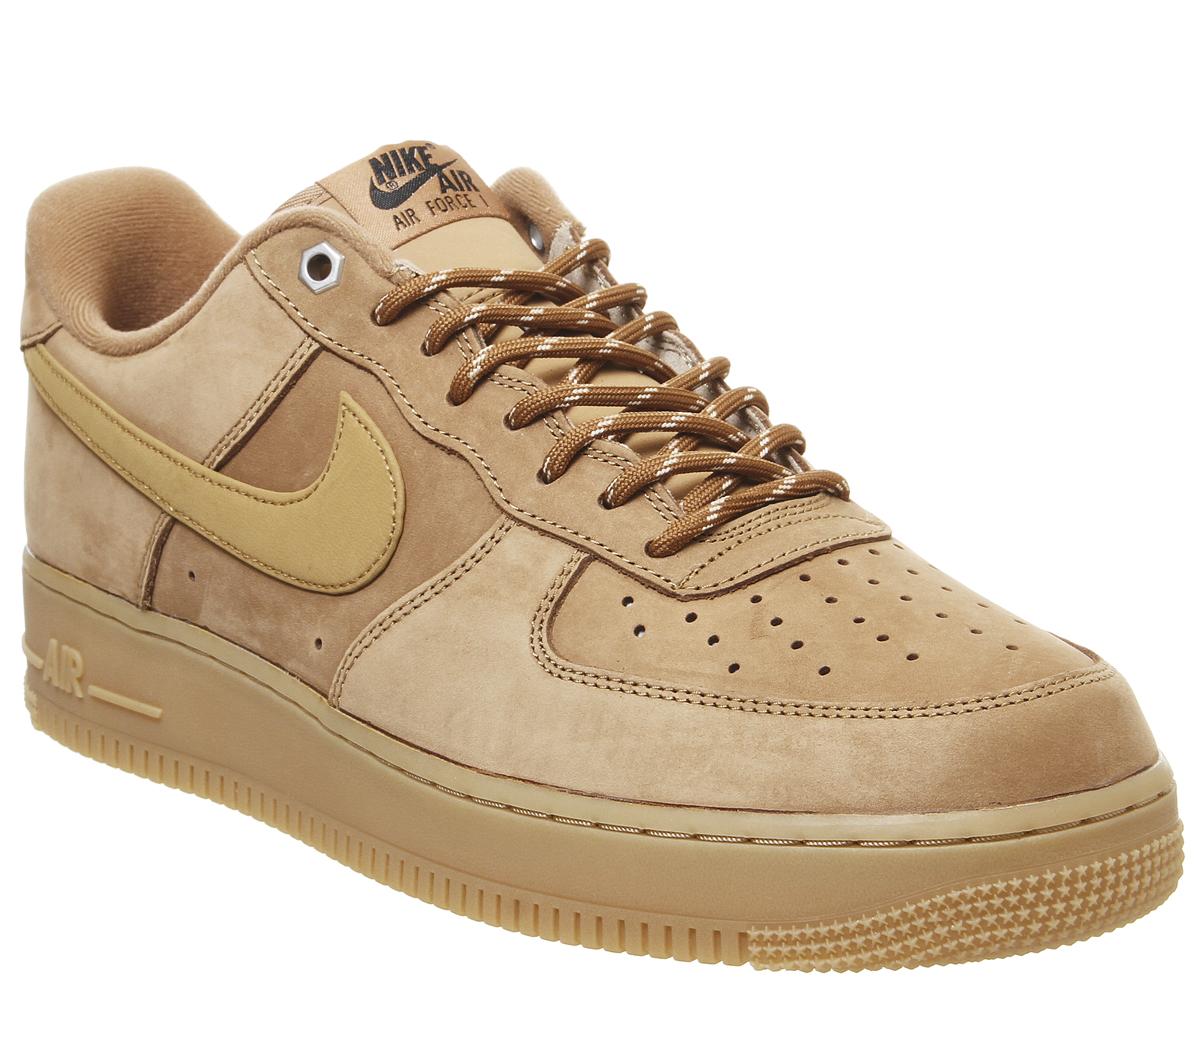 wheat color air force ones cheap online